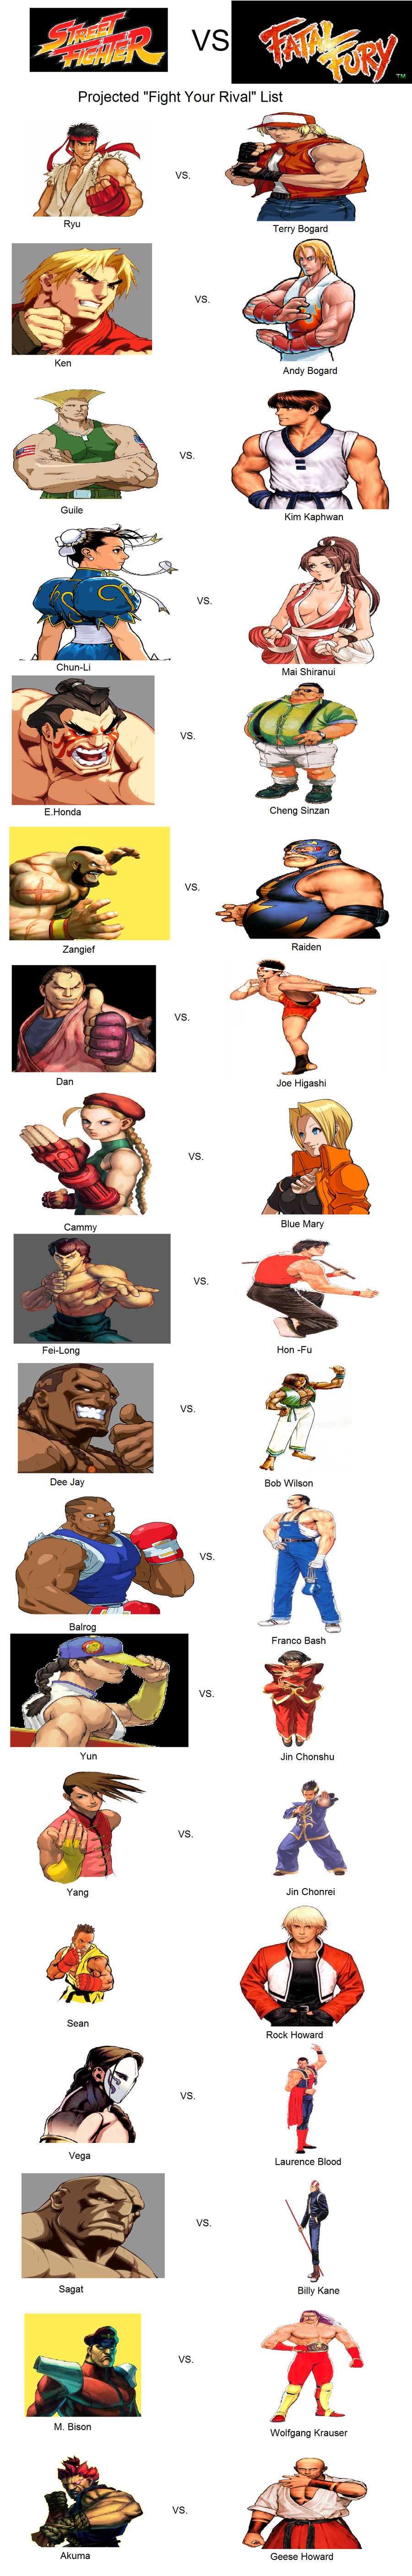 Street Fighter X Fatal Fury~Guile Bio and quotes by JohnnyOTGS on DeviantArt